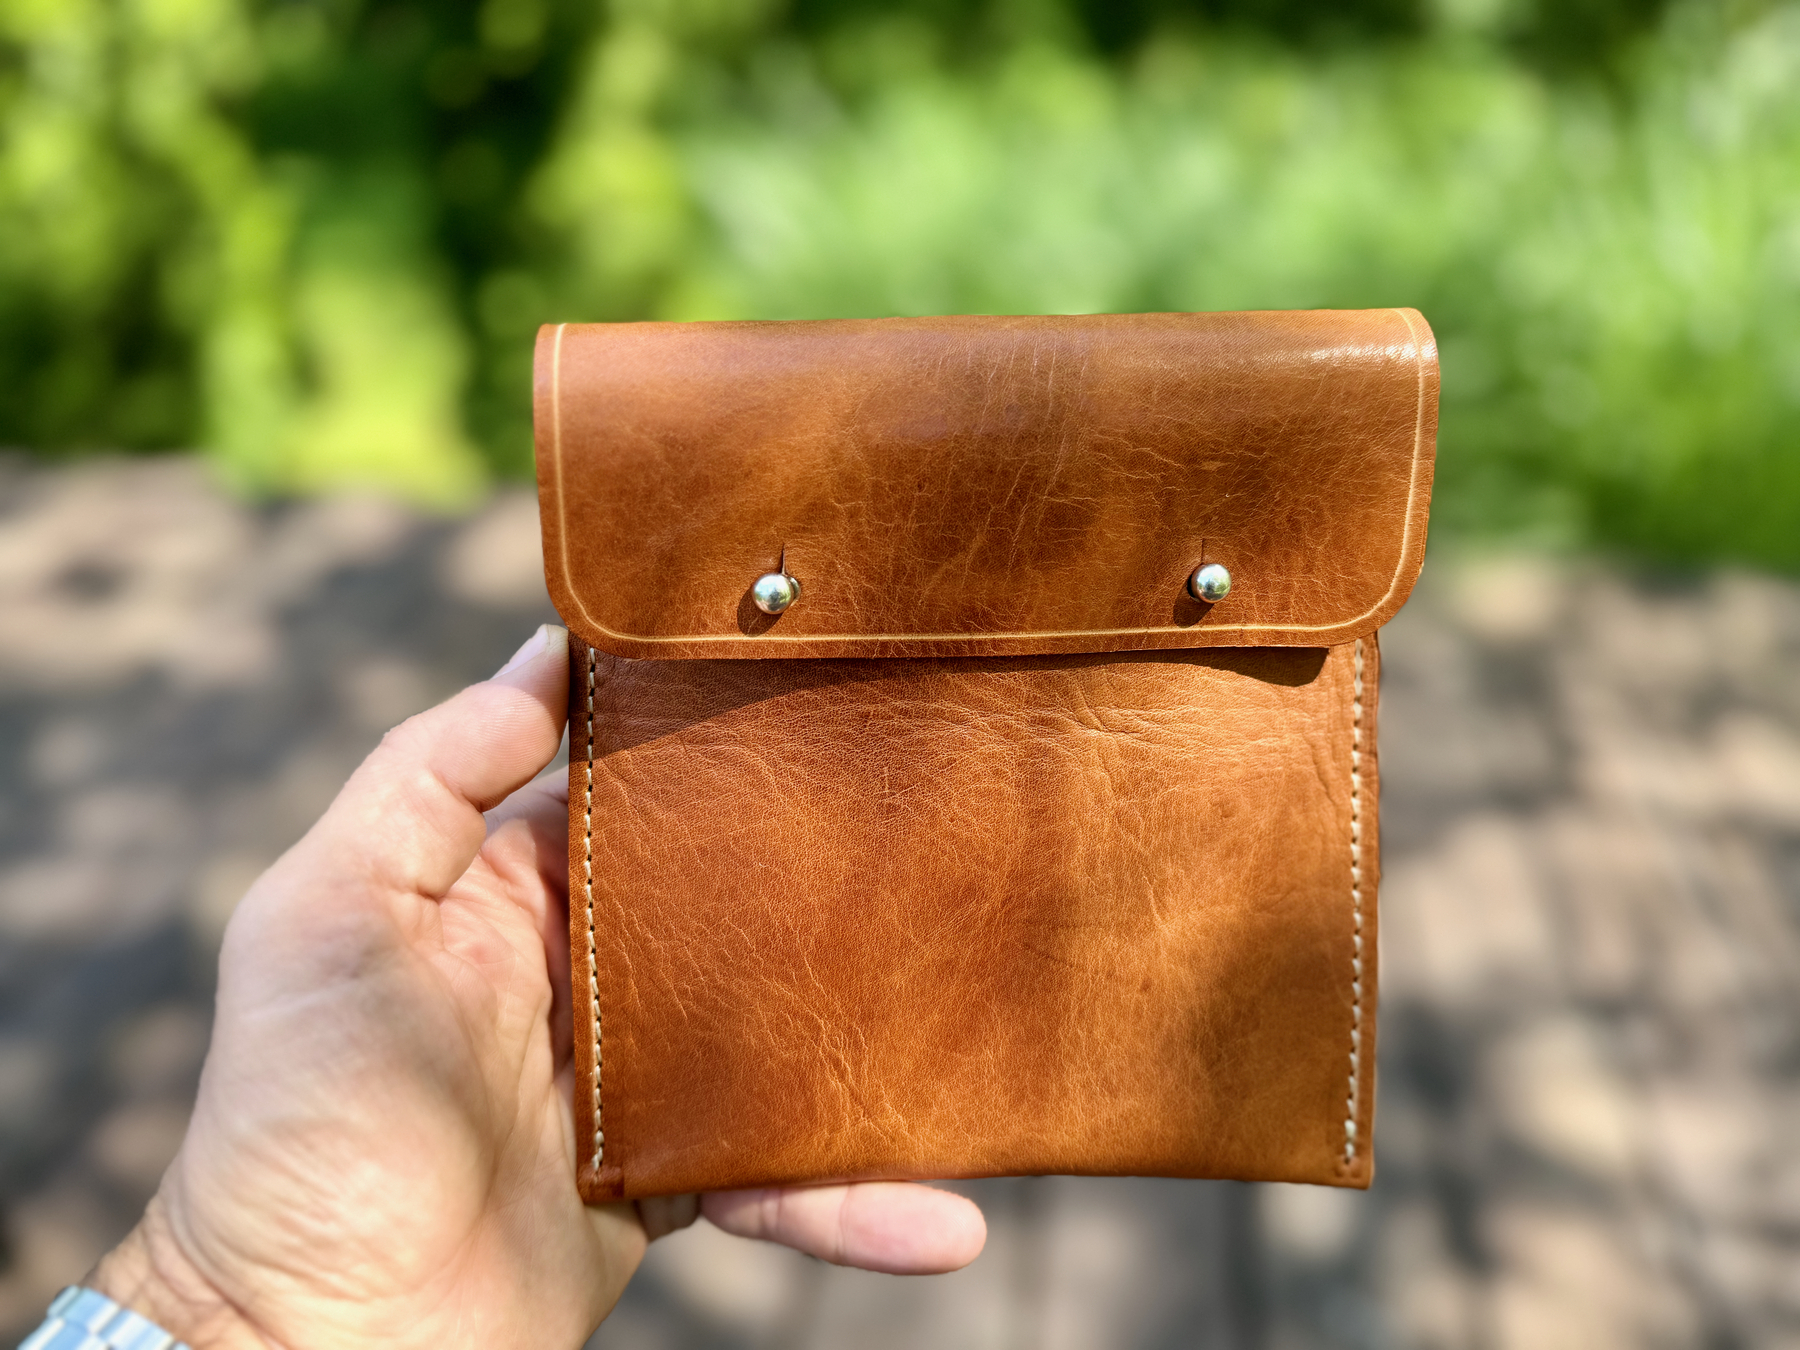 A person's hand holds a brown leather pouch with two metal snap buttons, against a blurred outdoor background.